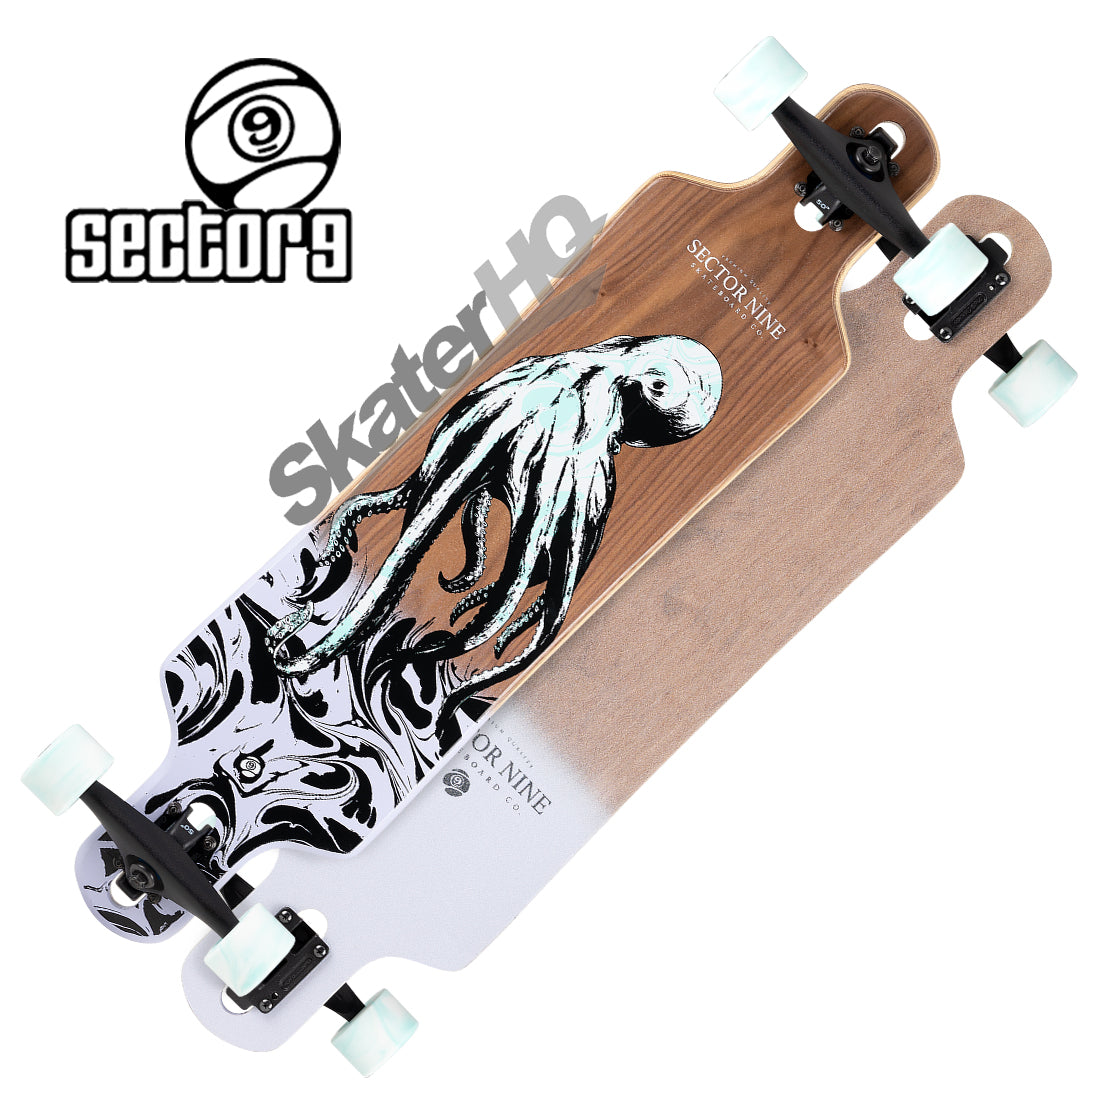 Sector 9 Bintang Abyss 38 Complete - Wood/White Skateboard Completes Longboards